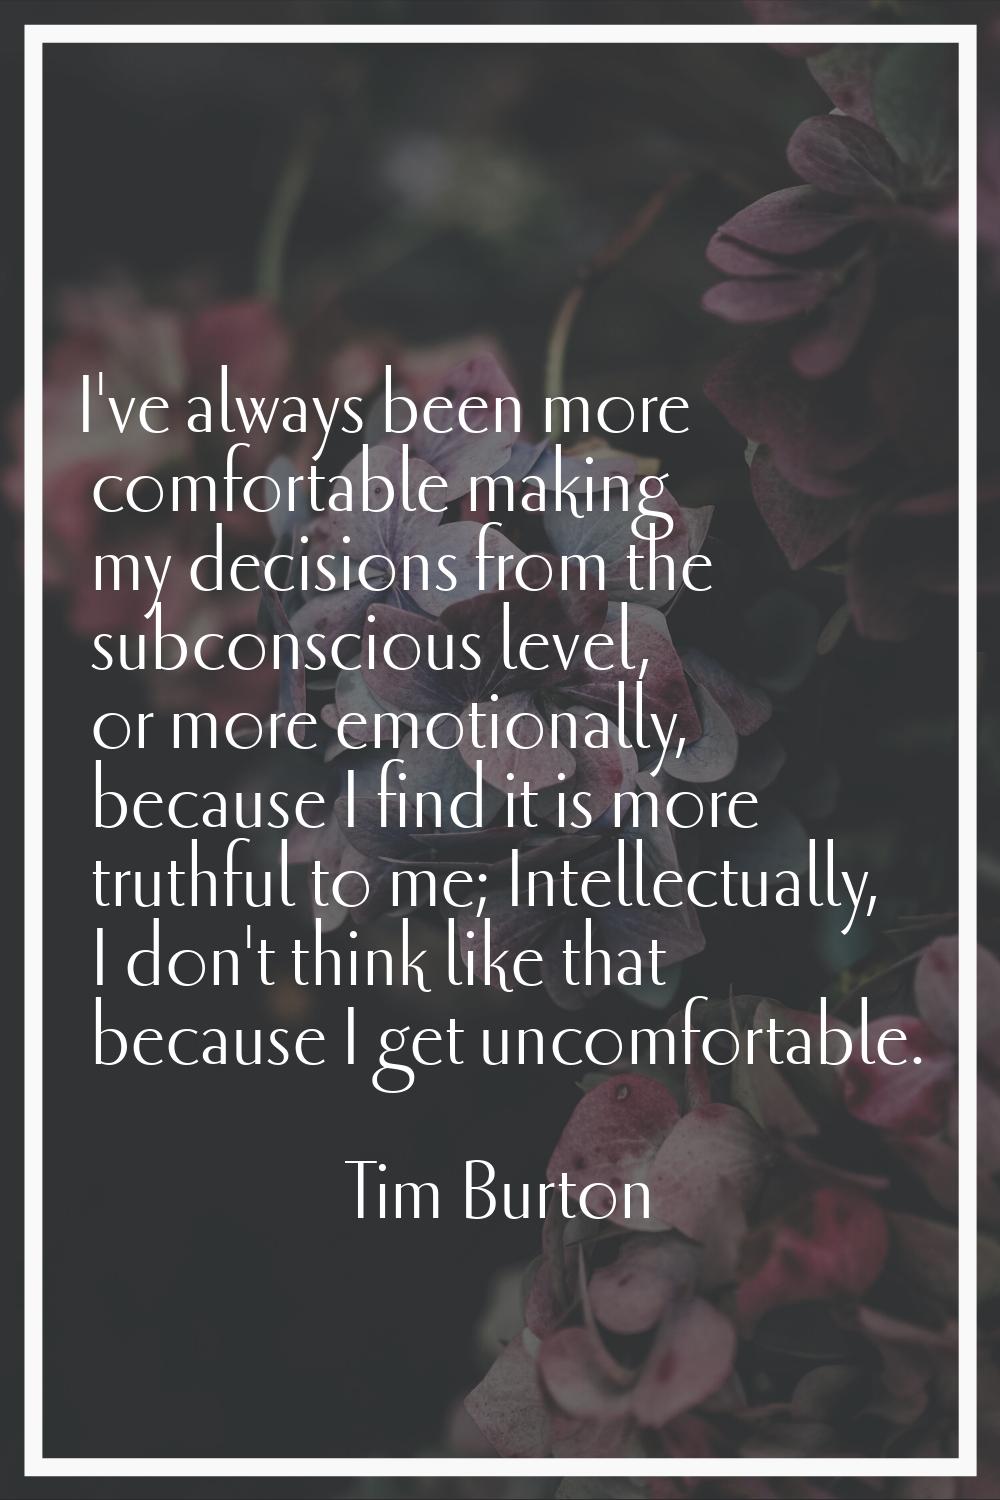 I've always been more comfortable making my decisions from the subconscious level, or more emotiona